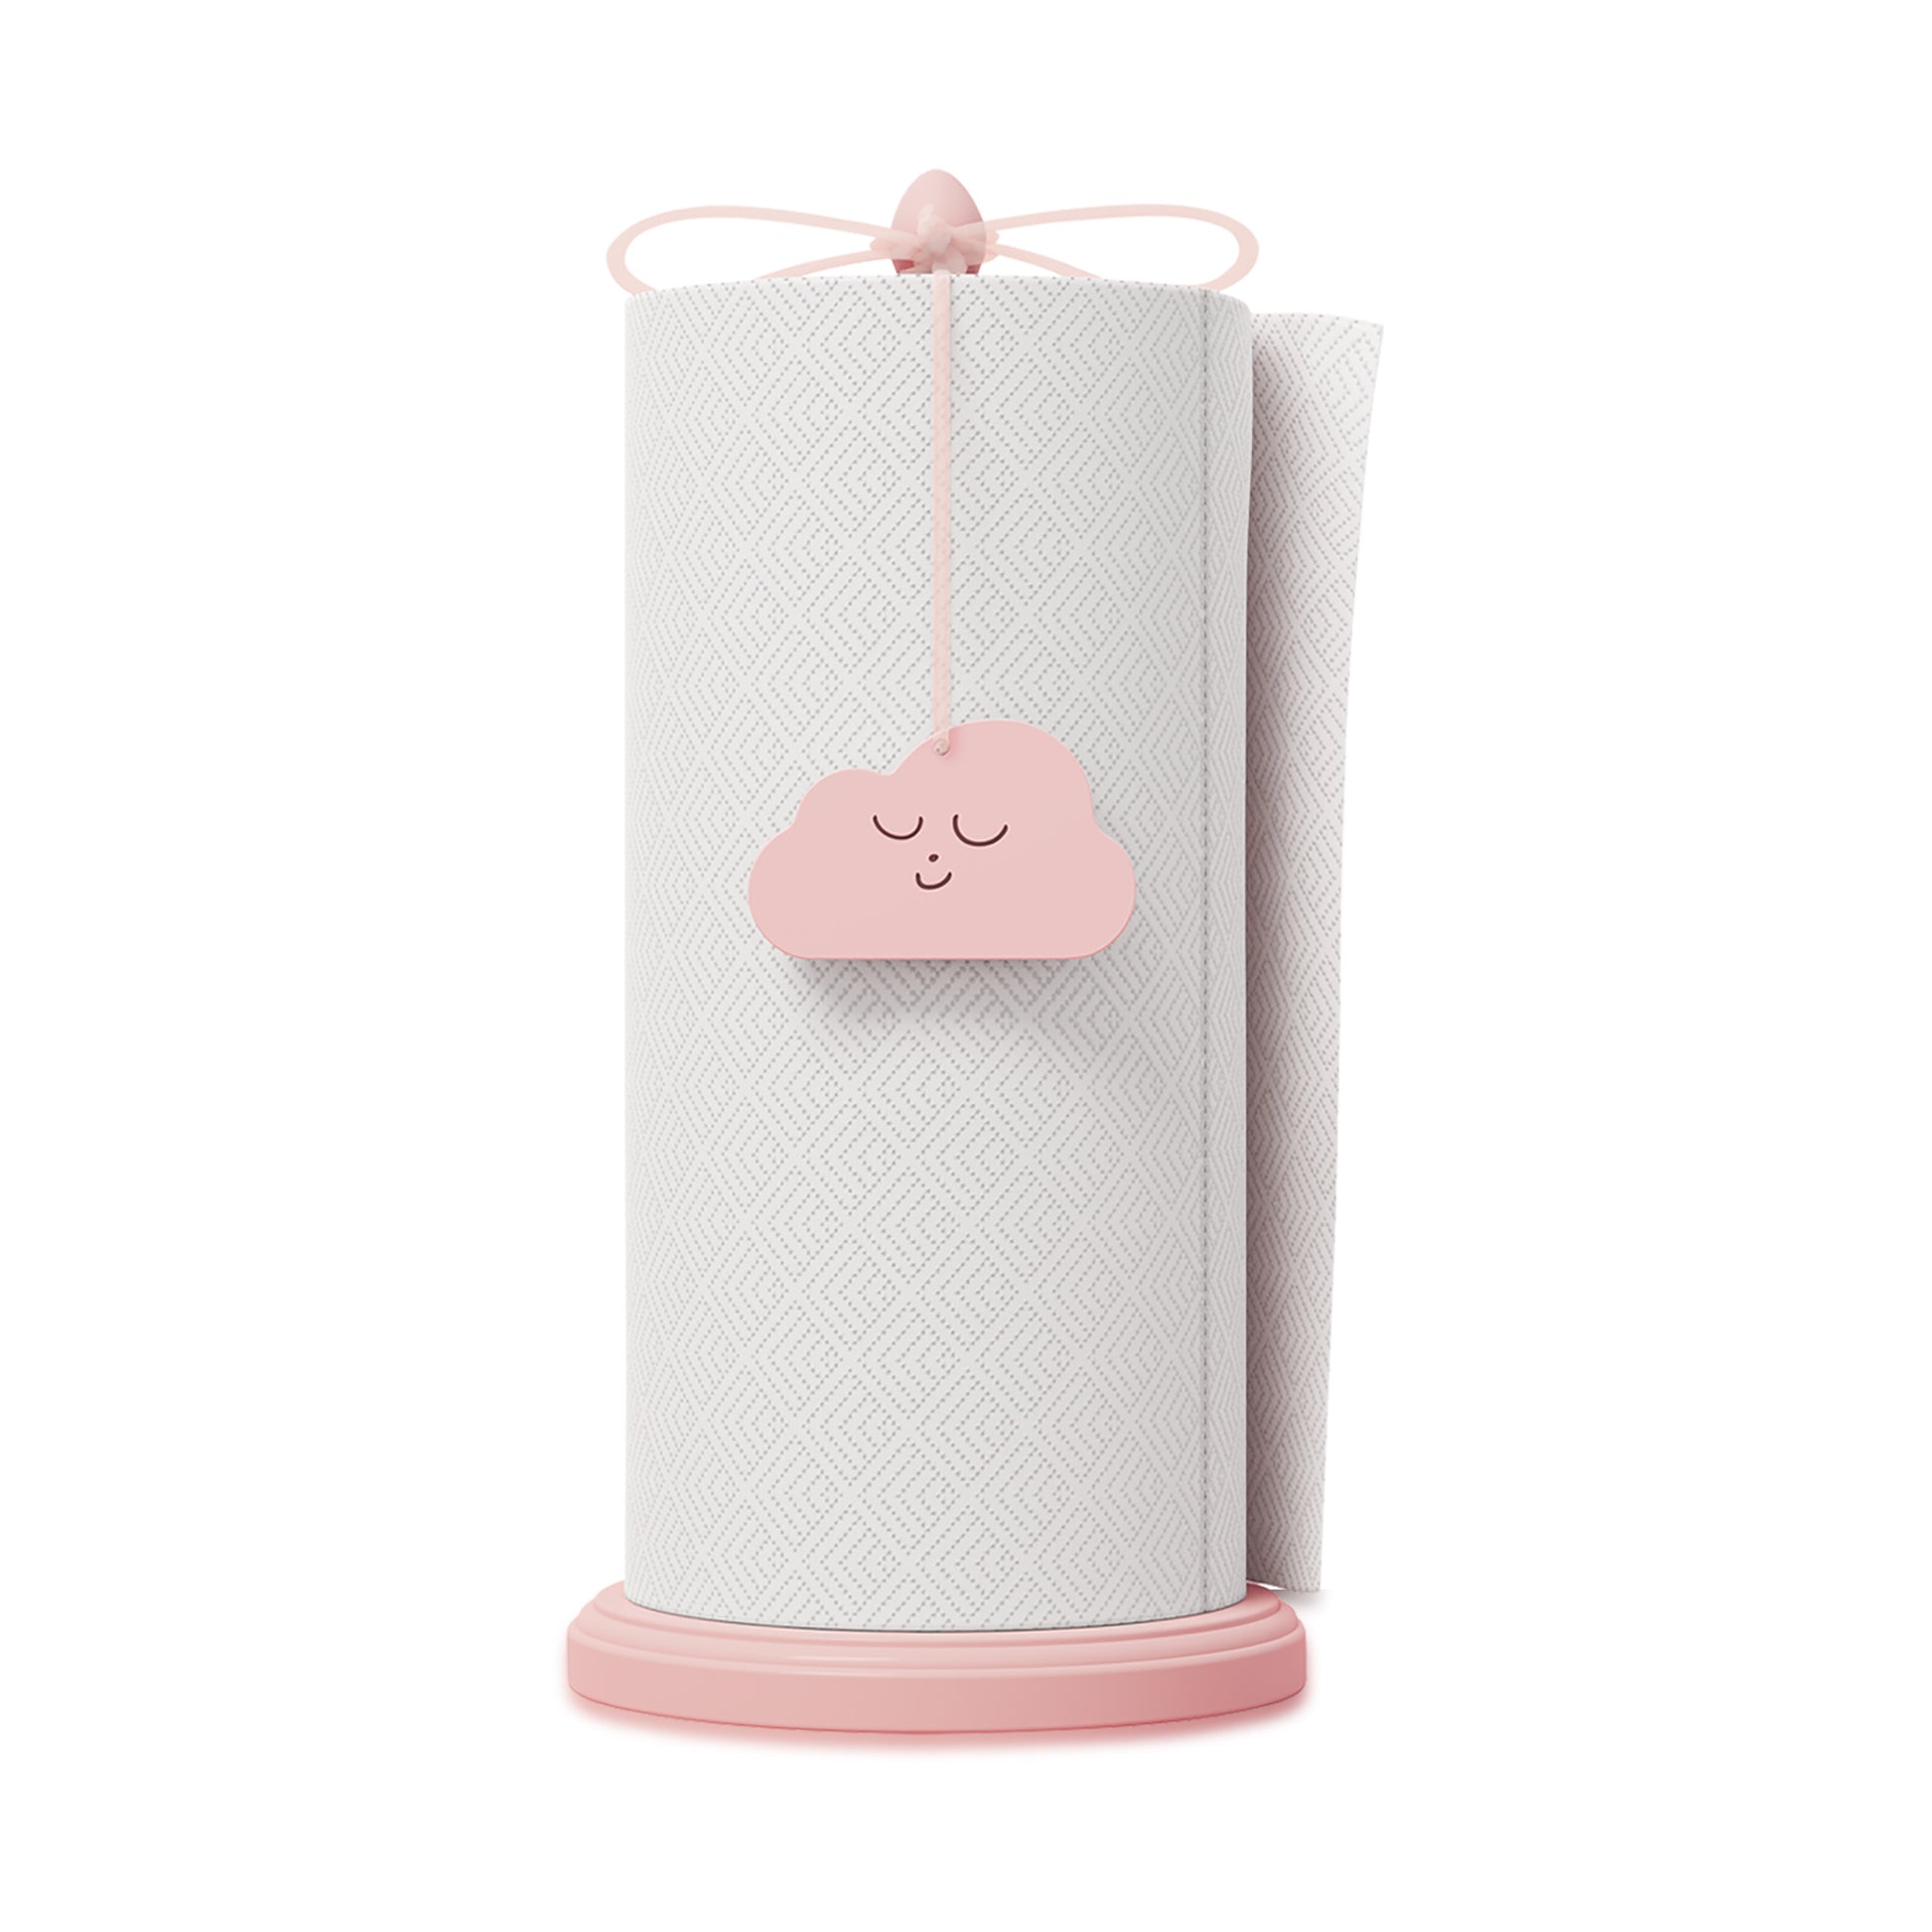 TONLEA Wood Paper Towel Holder with Fixer, Paper Towel Holder Countertop,  Kitchen Towel Holder Free-Standing with Fixed or Non-Slip Wooden Base-Pink